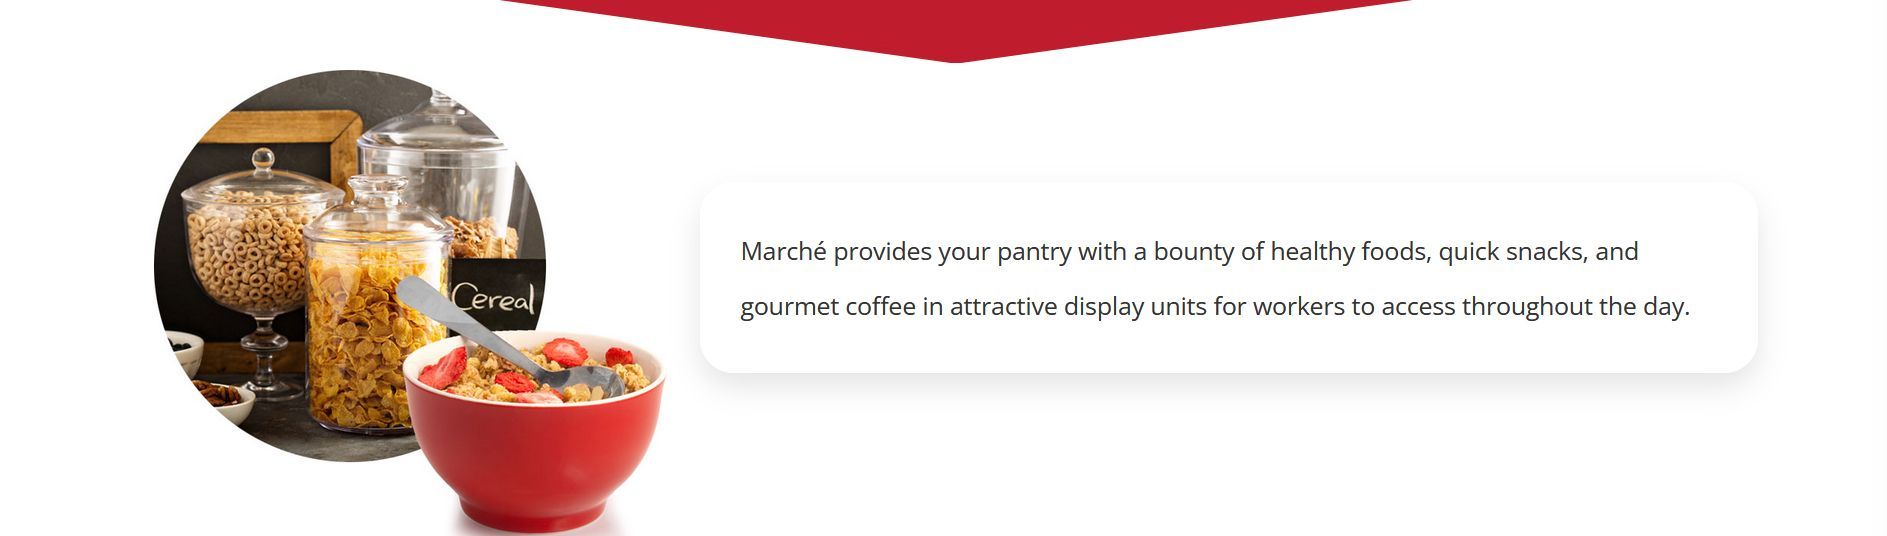 Marche provides your pantry with a bounty of healthy foods, quick snacks and gourmet coffee